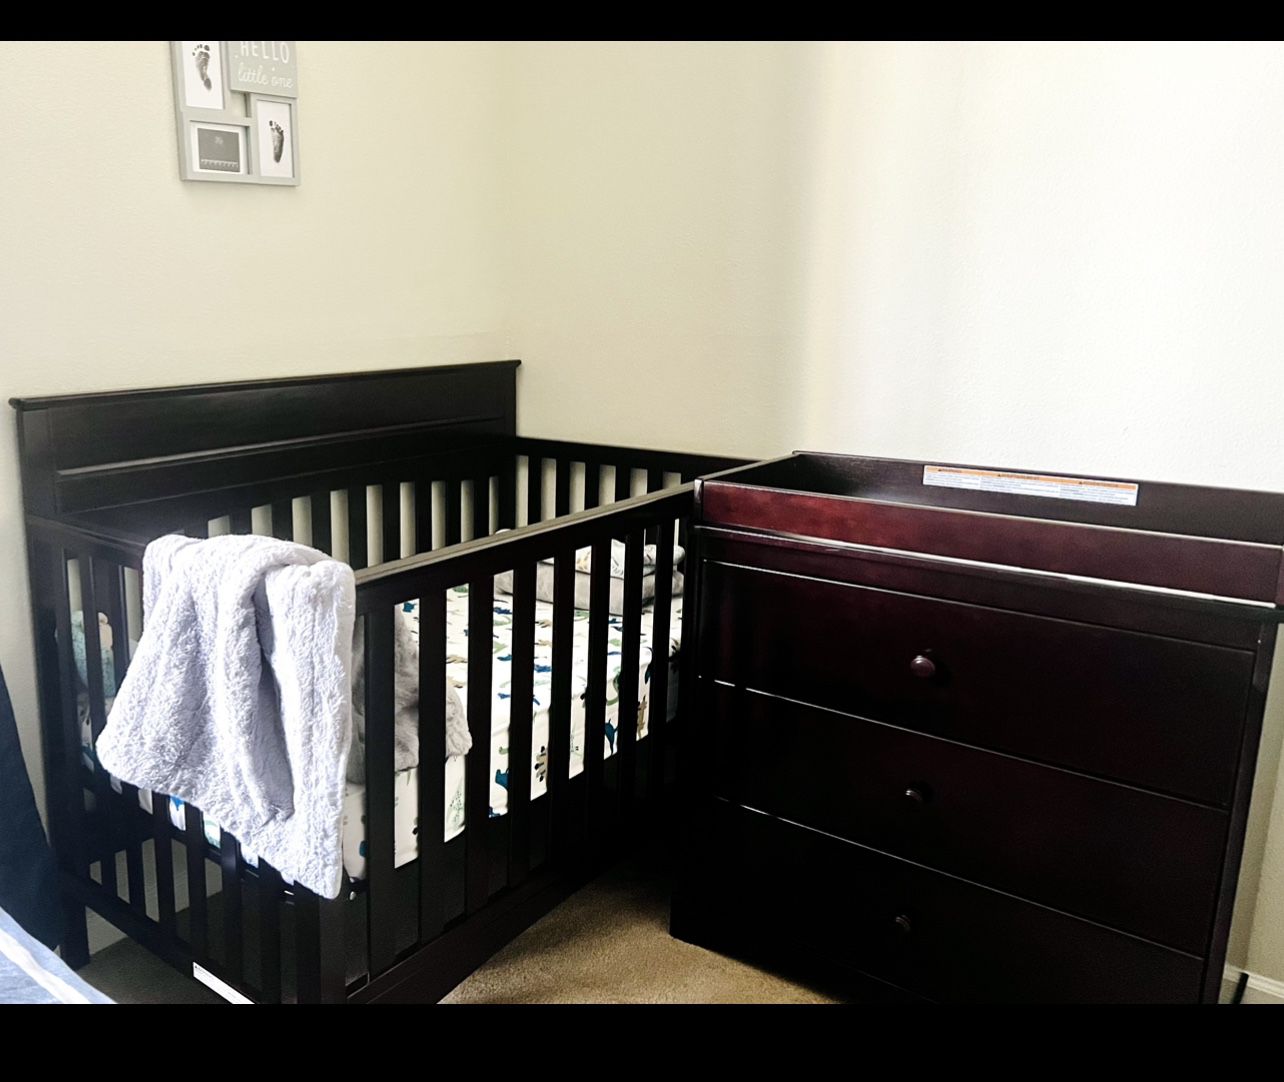 New/Gently Used DELTA Baby Crib and Dresser